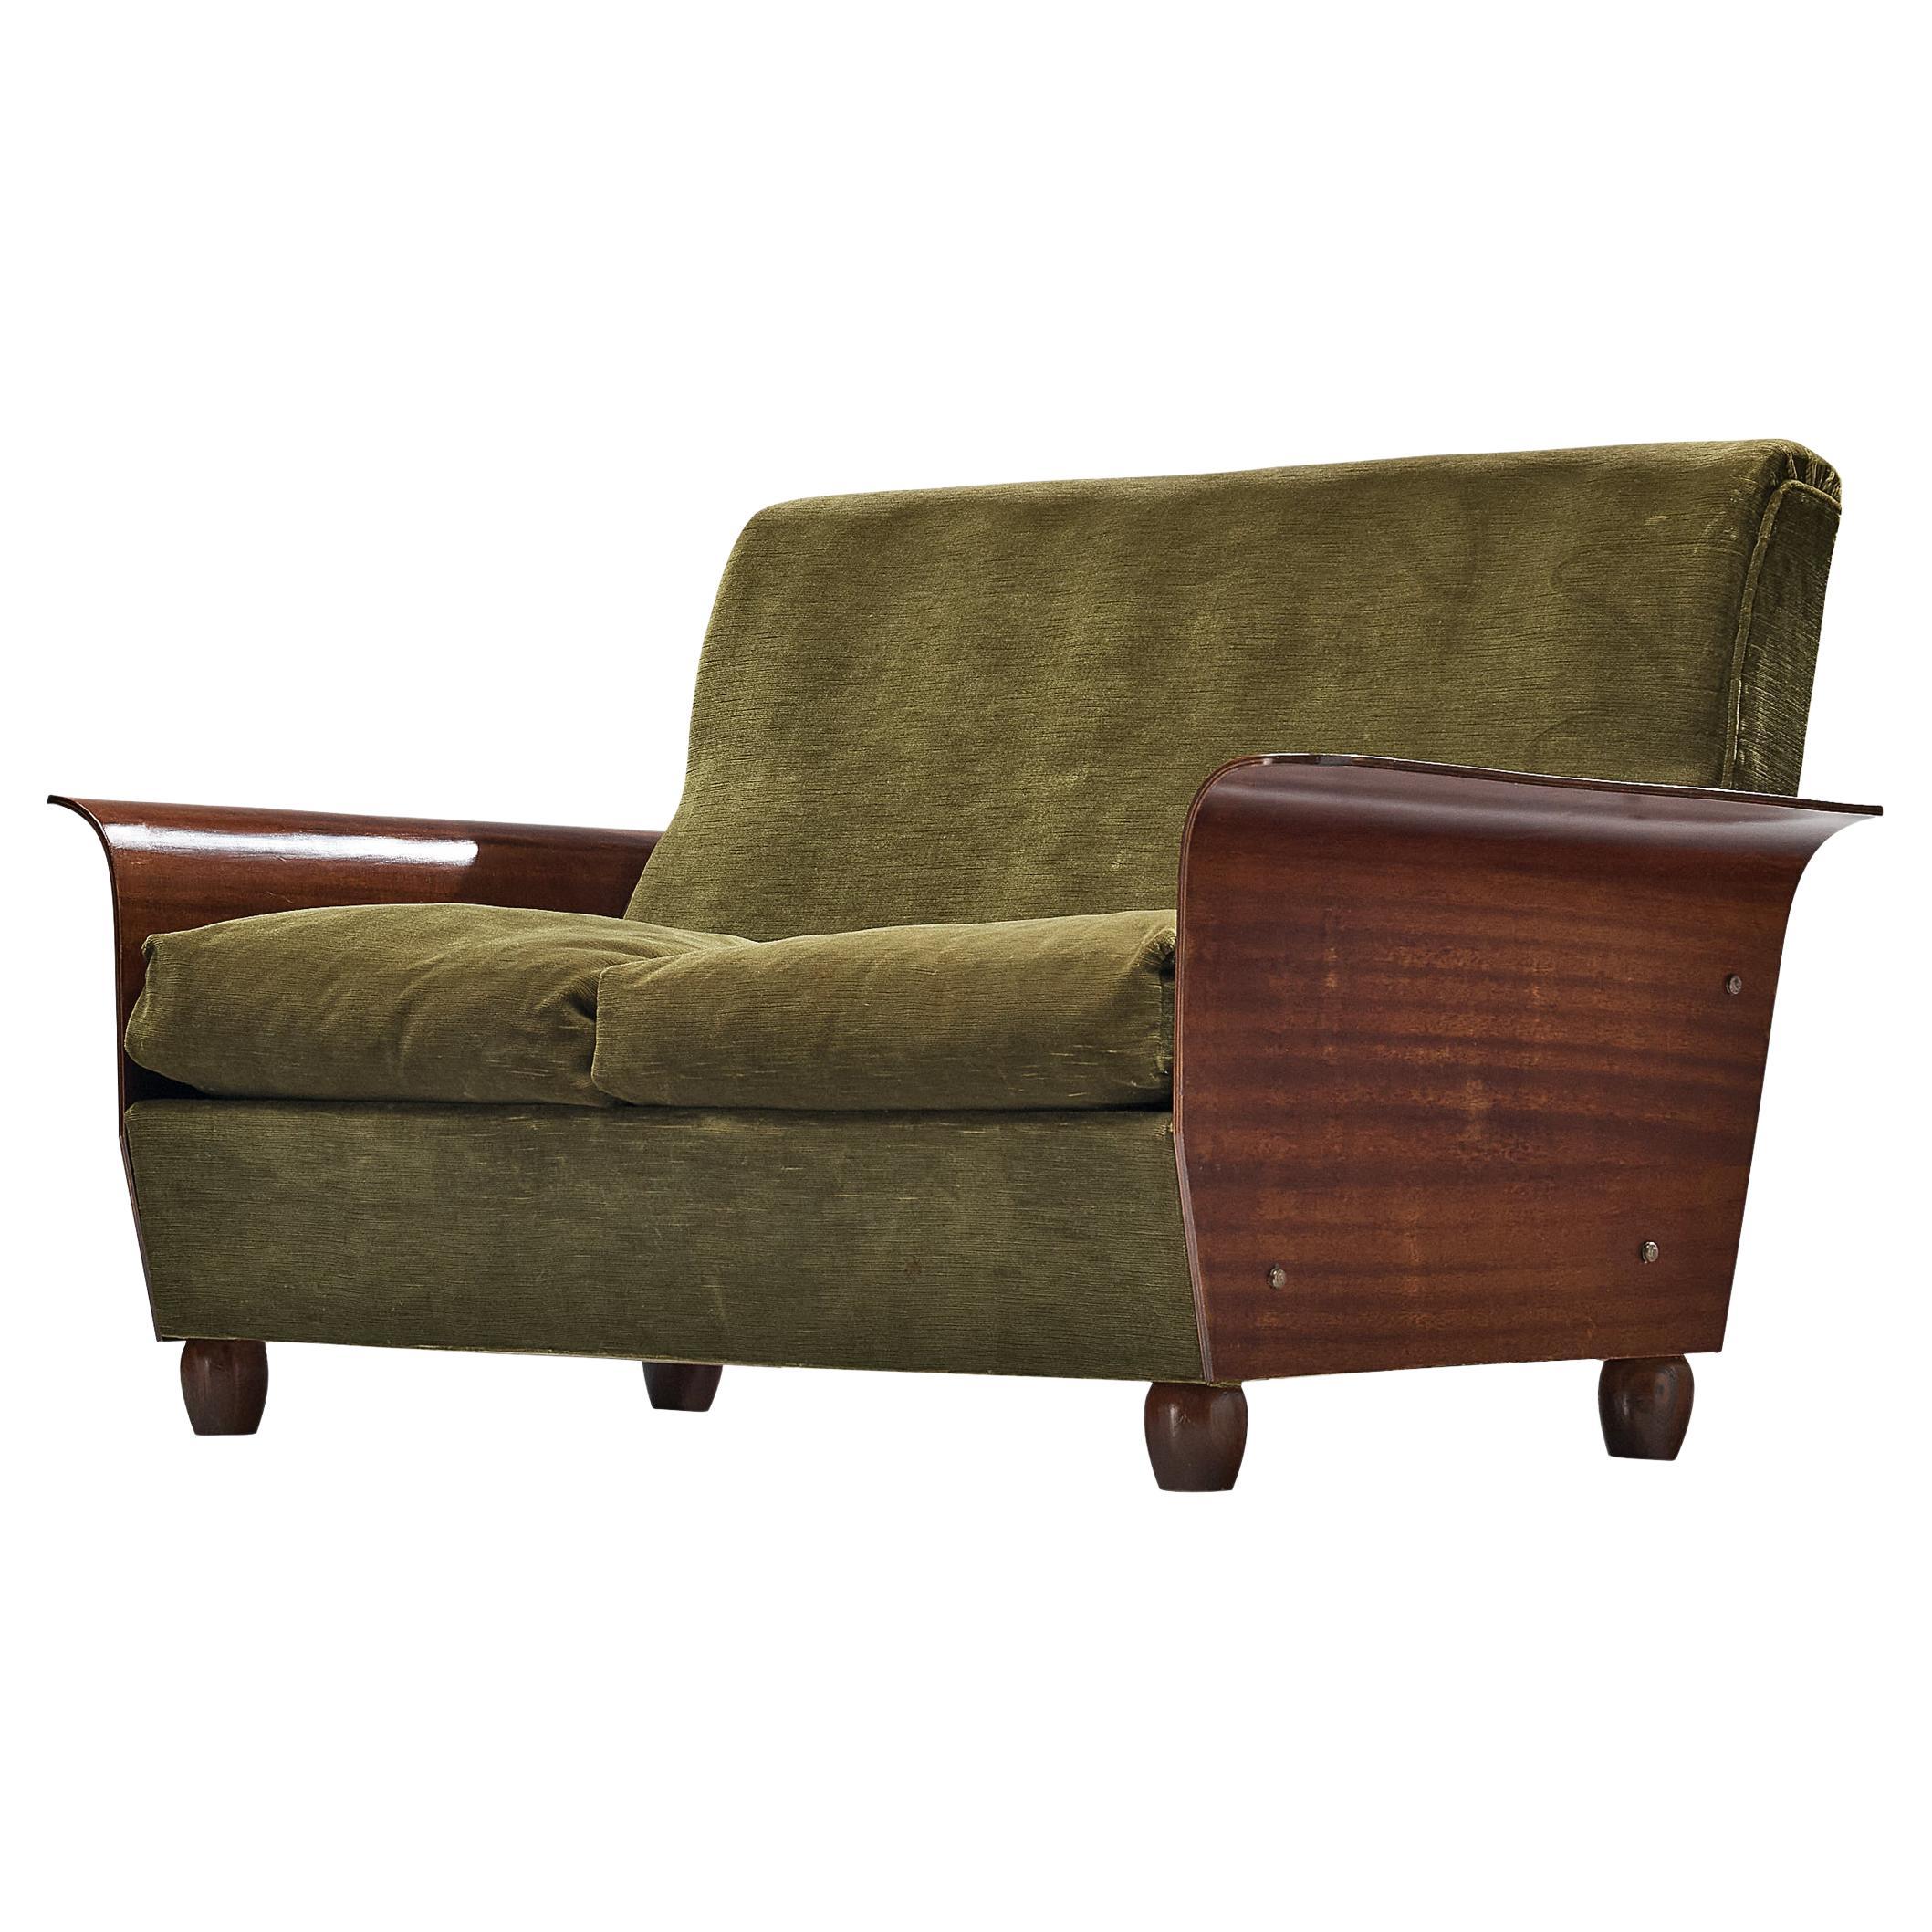 Exquisite Italian Two-Seat Sofa in Green Velvet Upholstery and Mahogany For Sale